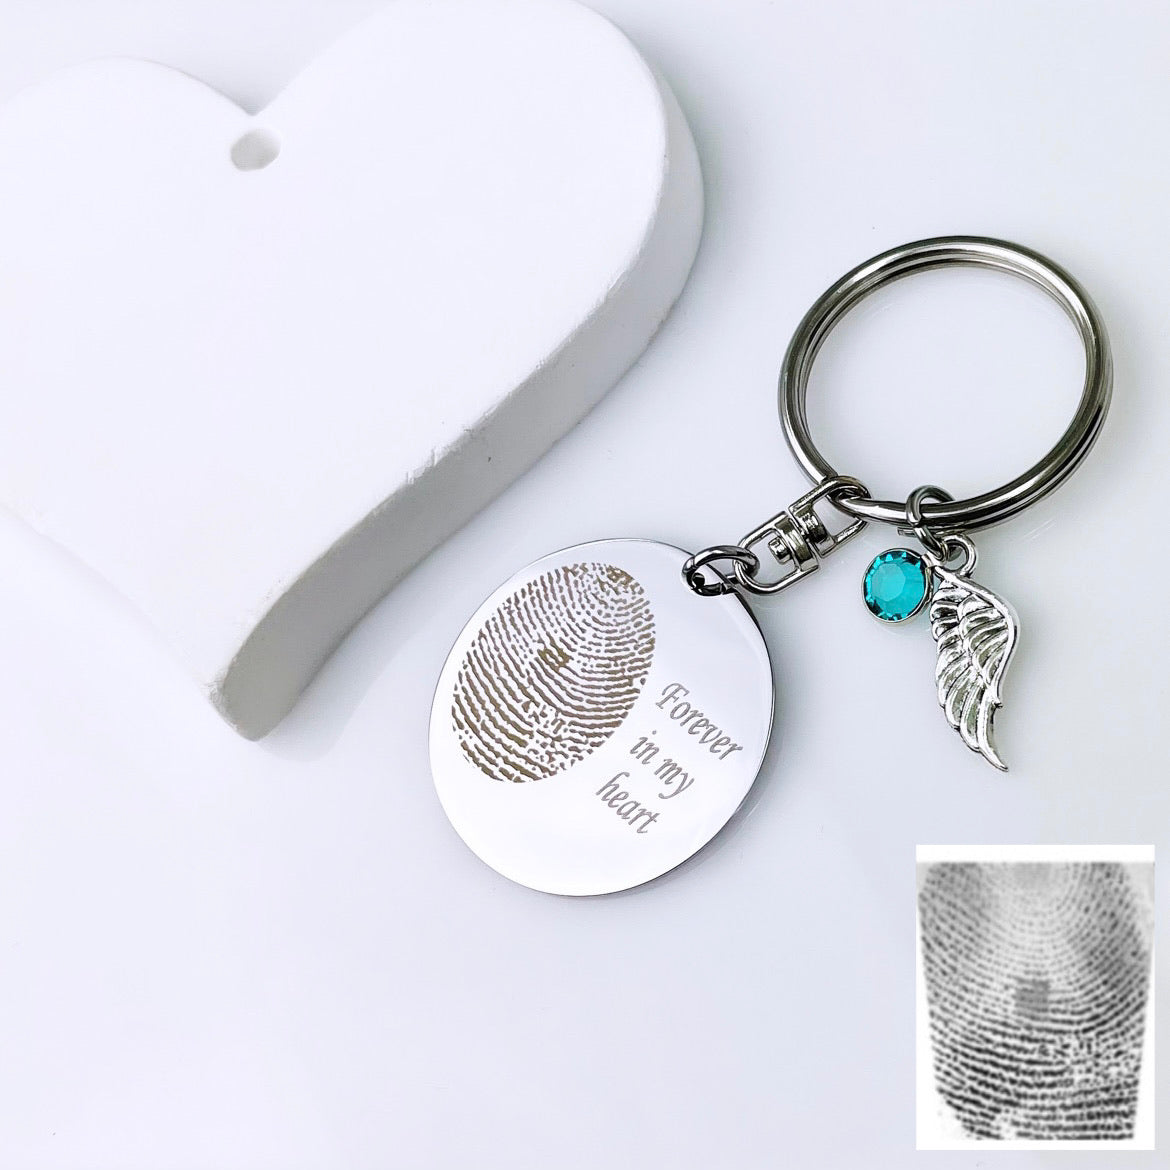 Custom Key Chain - Personalized with Your Special Message and/or Names -  Hand Stamped Sterling Silver Keychain